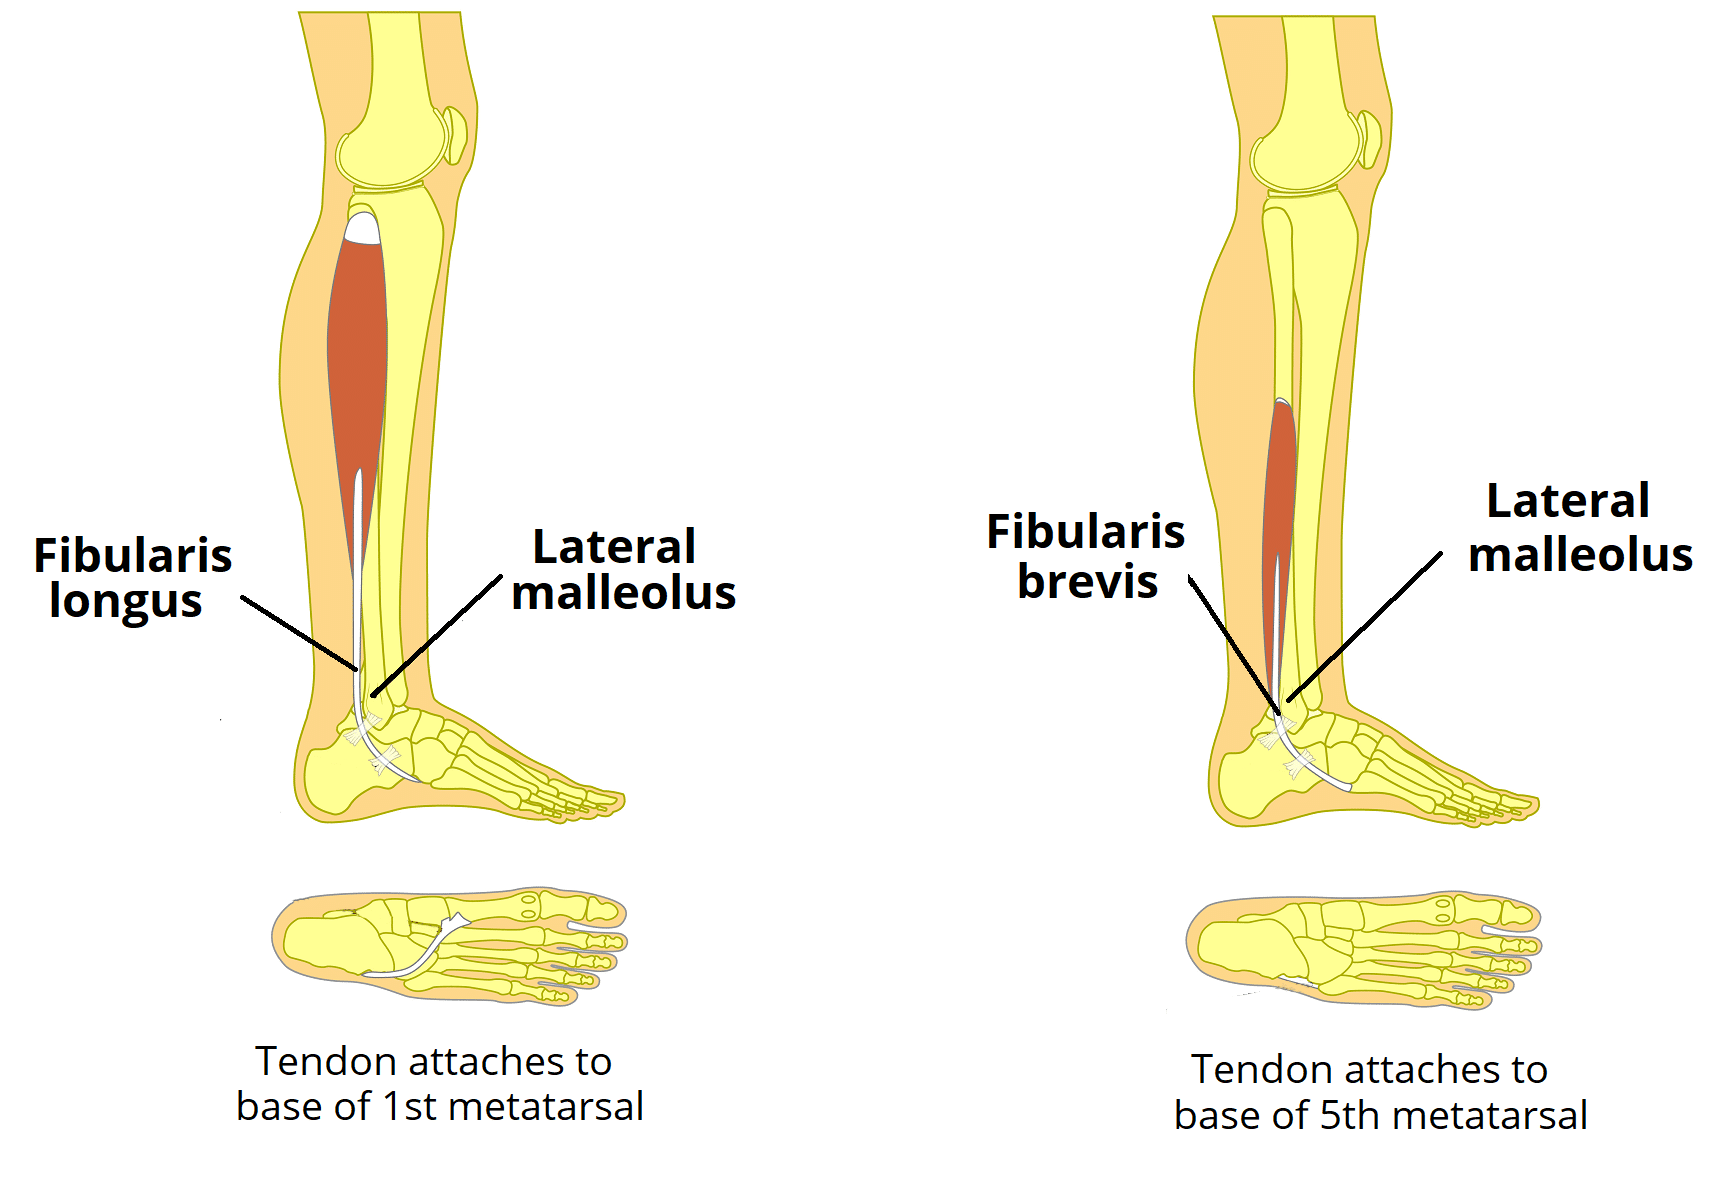 Muscles in the Lateral Compartment of the Leg - TeachMeAnatomy